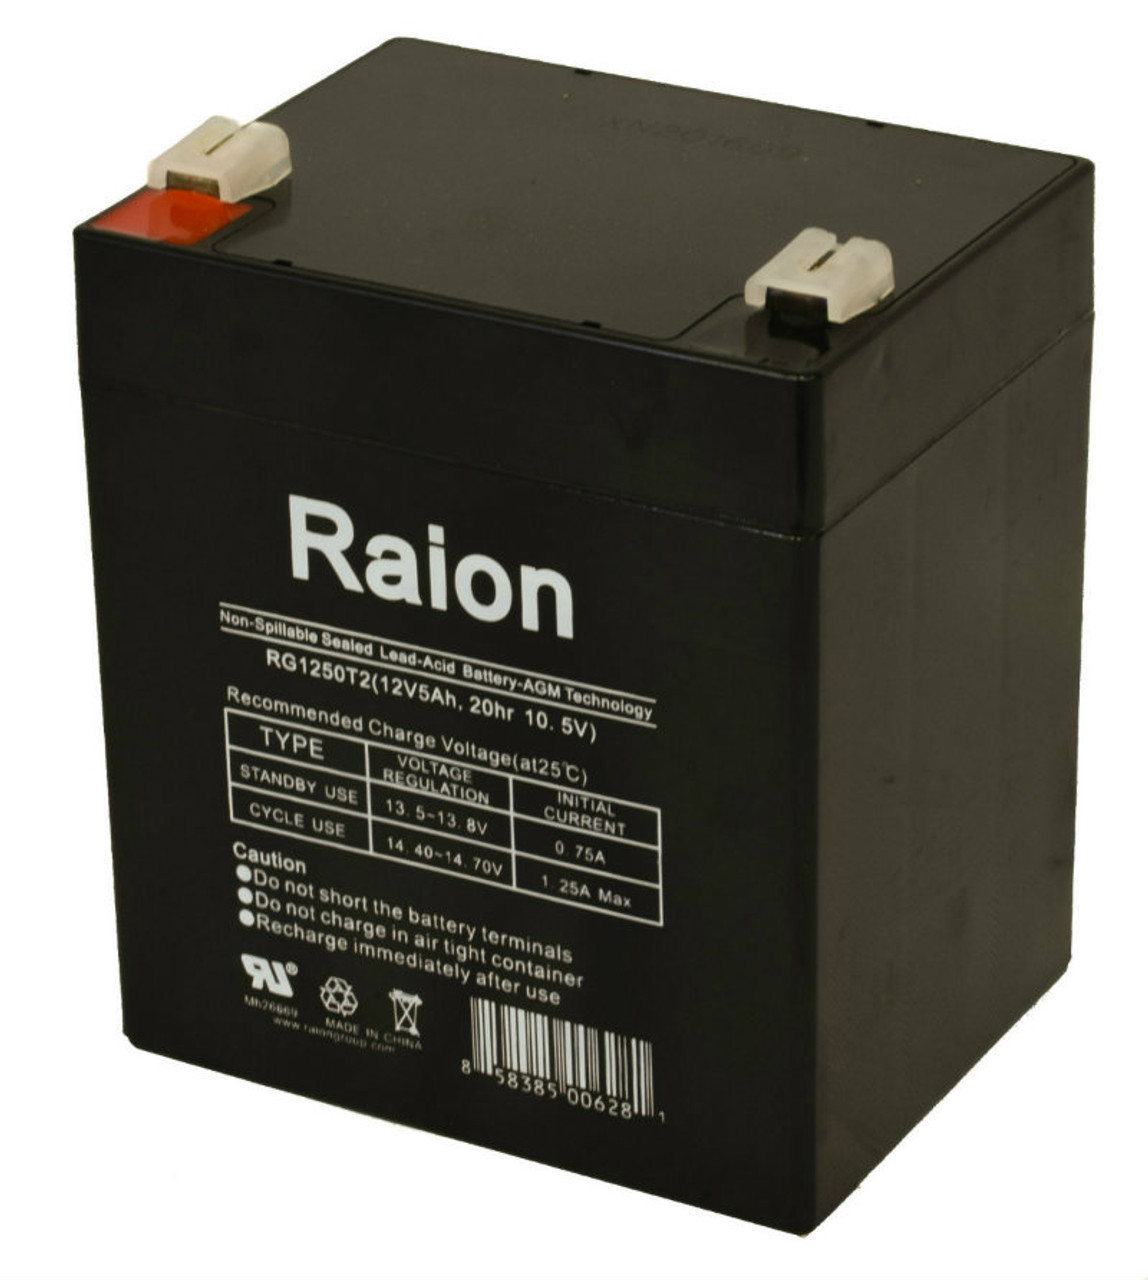 Raion Power RG1250T1 Replacement Alarm Security System Battery for Securitron EXD1